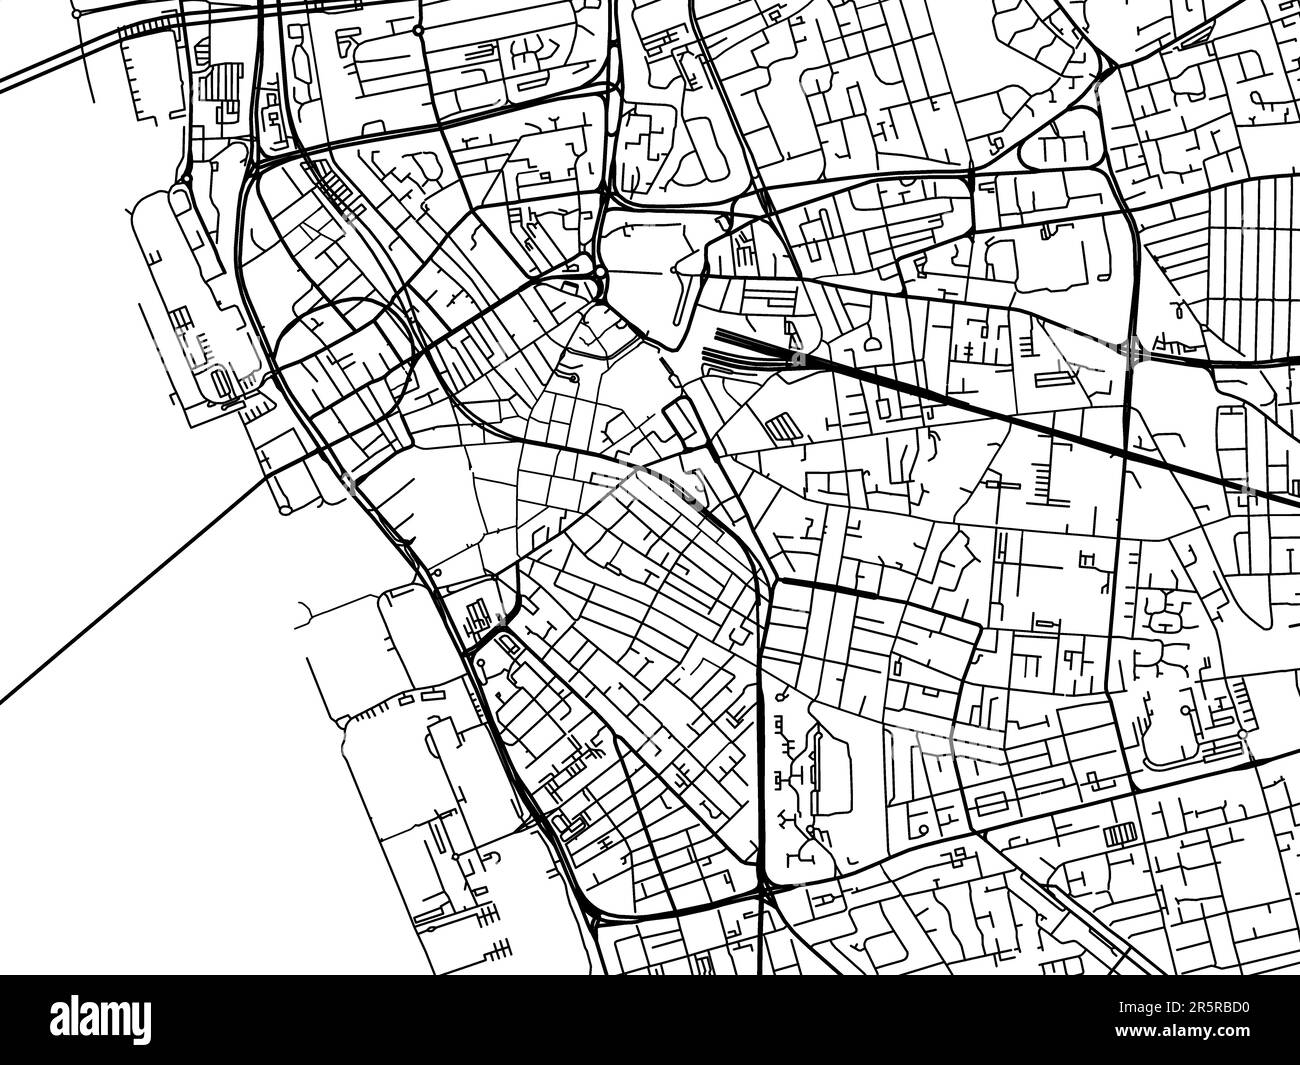 Road map of the city of  Liverpool Center in the United Kingdom on a white background. Stock Photo